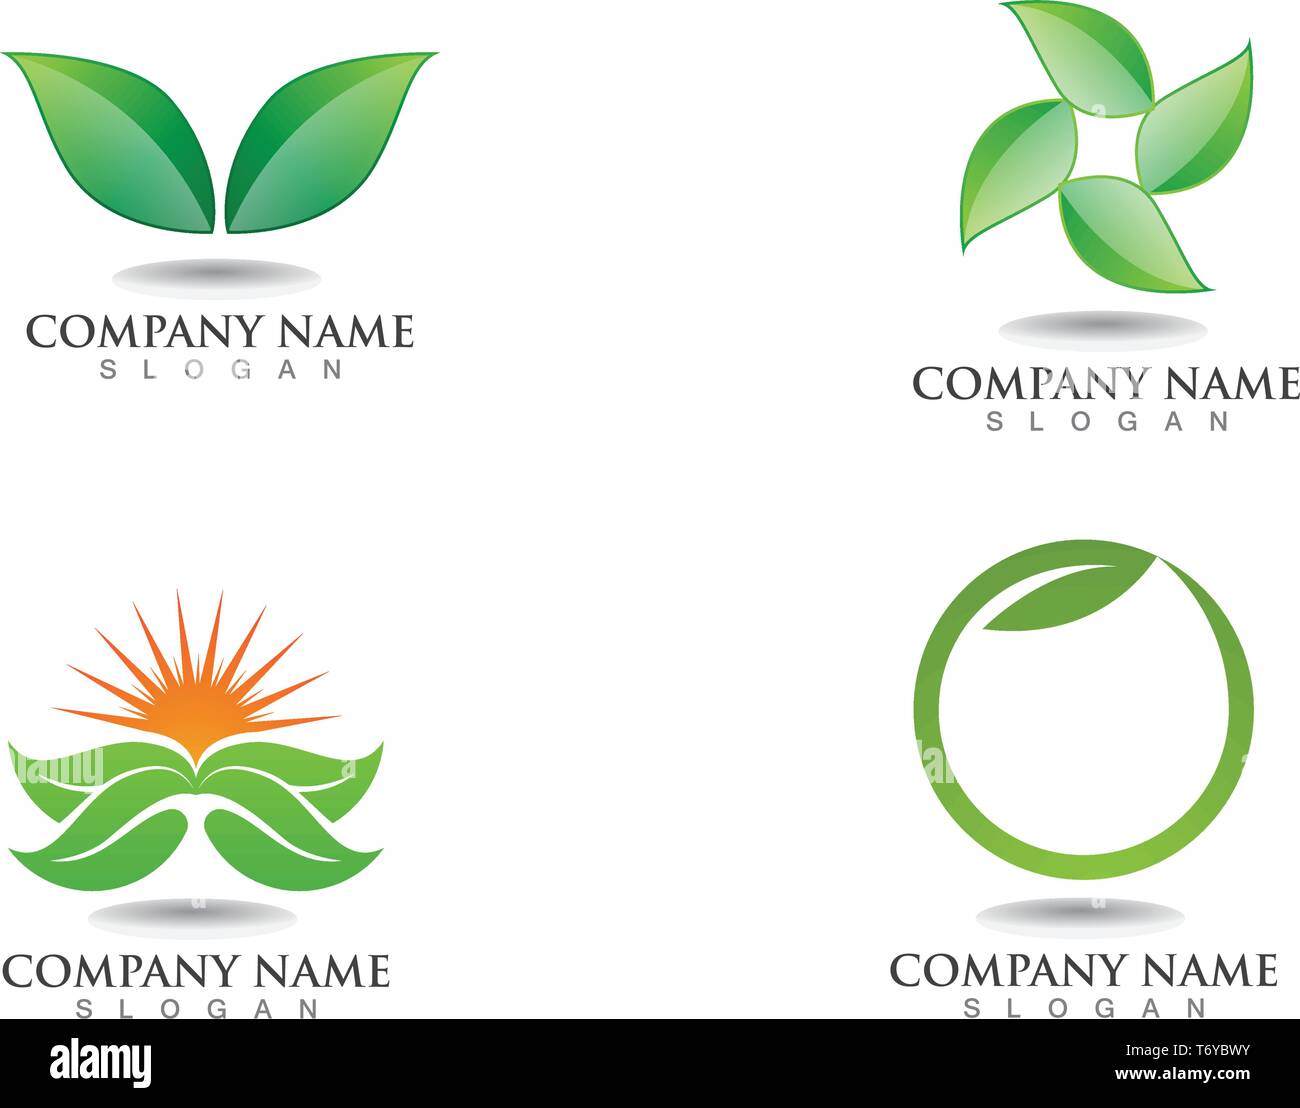 Logos Of Green Leaf Ecology Nature Element Icon Stock Vector Image Art Alamy